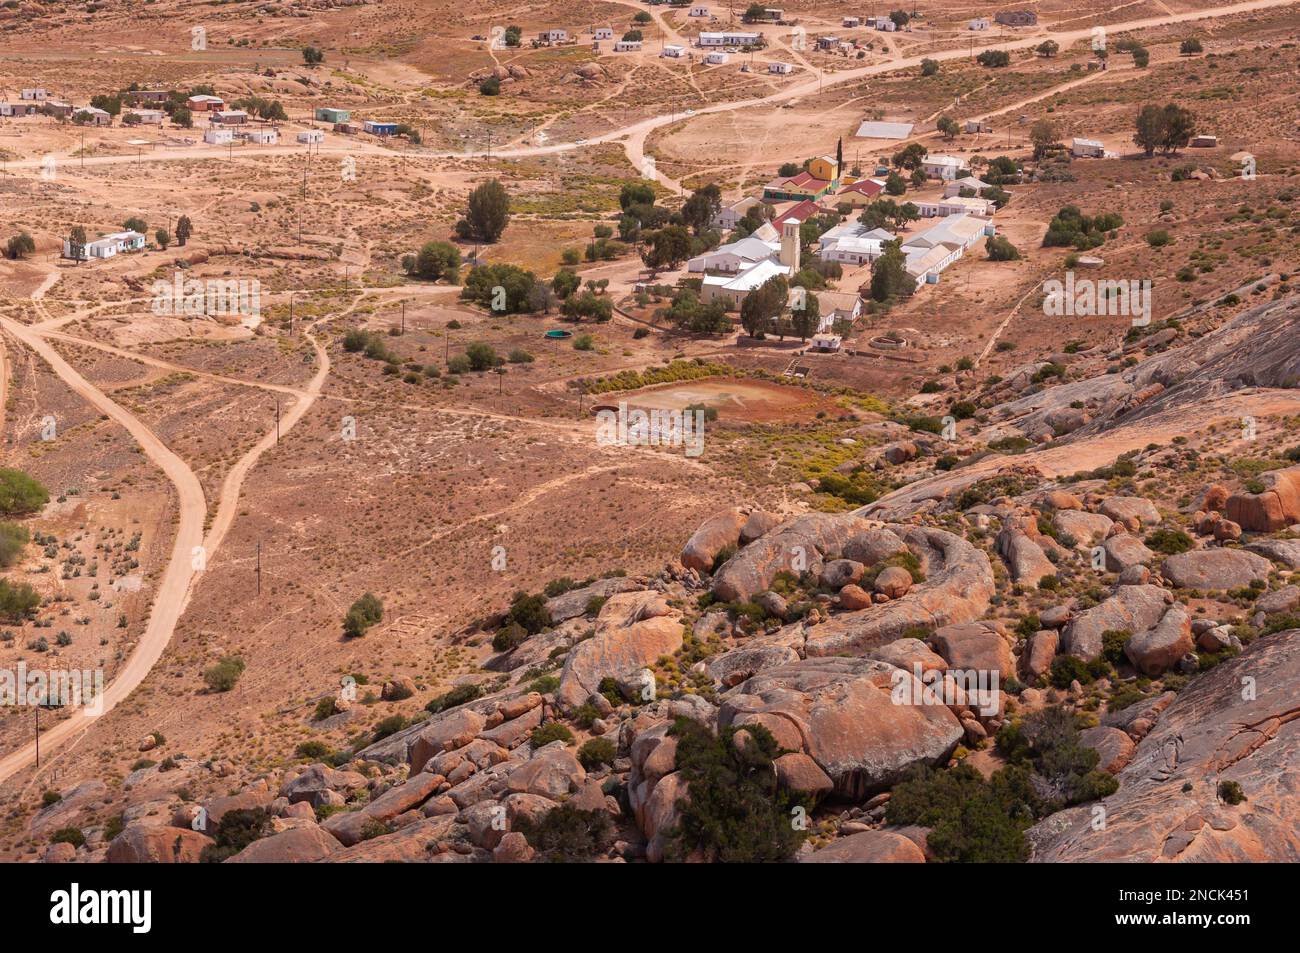 An aerial view of the Rietpoort Catholic mission station situated in the Namaqualand South Africa. Photographed in October 2011. Stock Photo